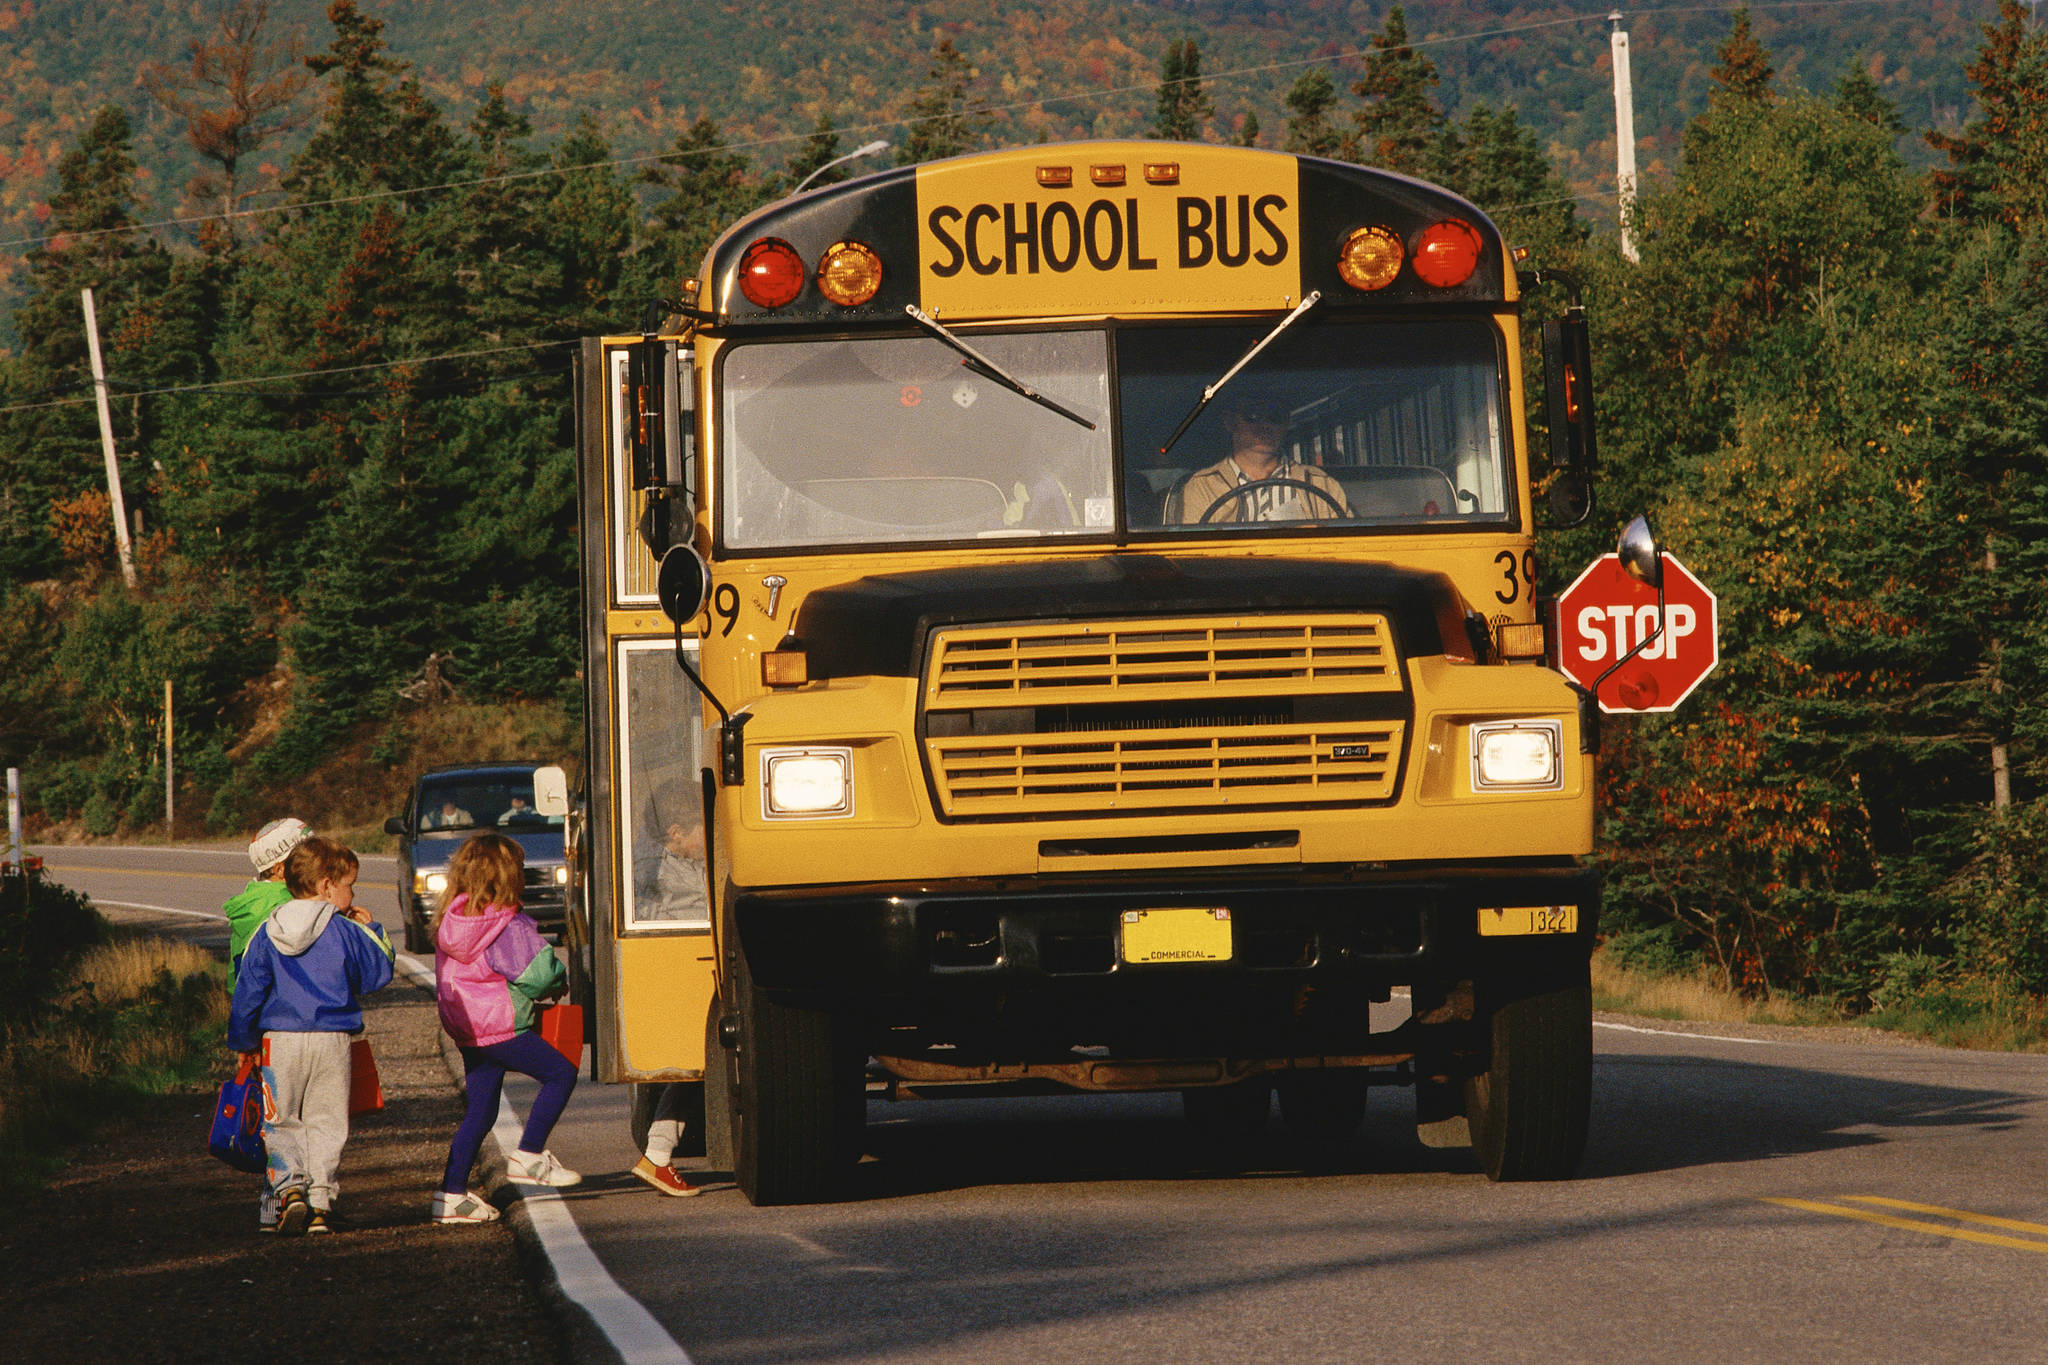 Cars must stop when a school bus flashes its red lights, and remain stopped until the lights are turned off. (Courtesy photo)